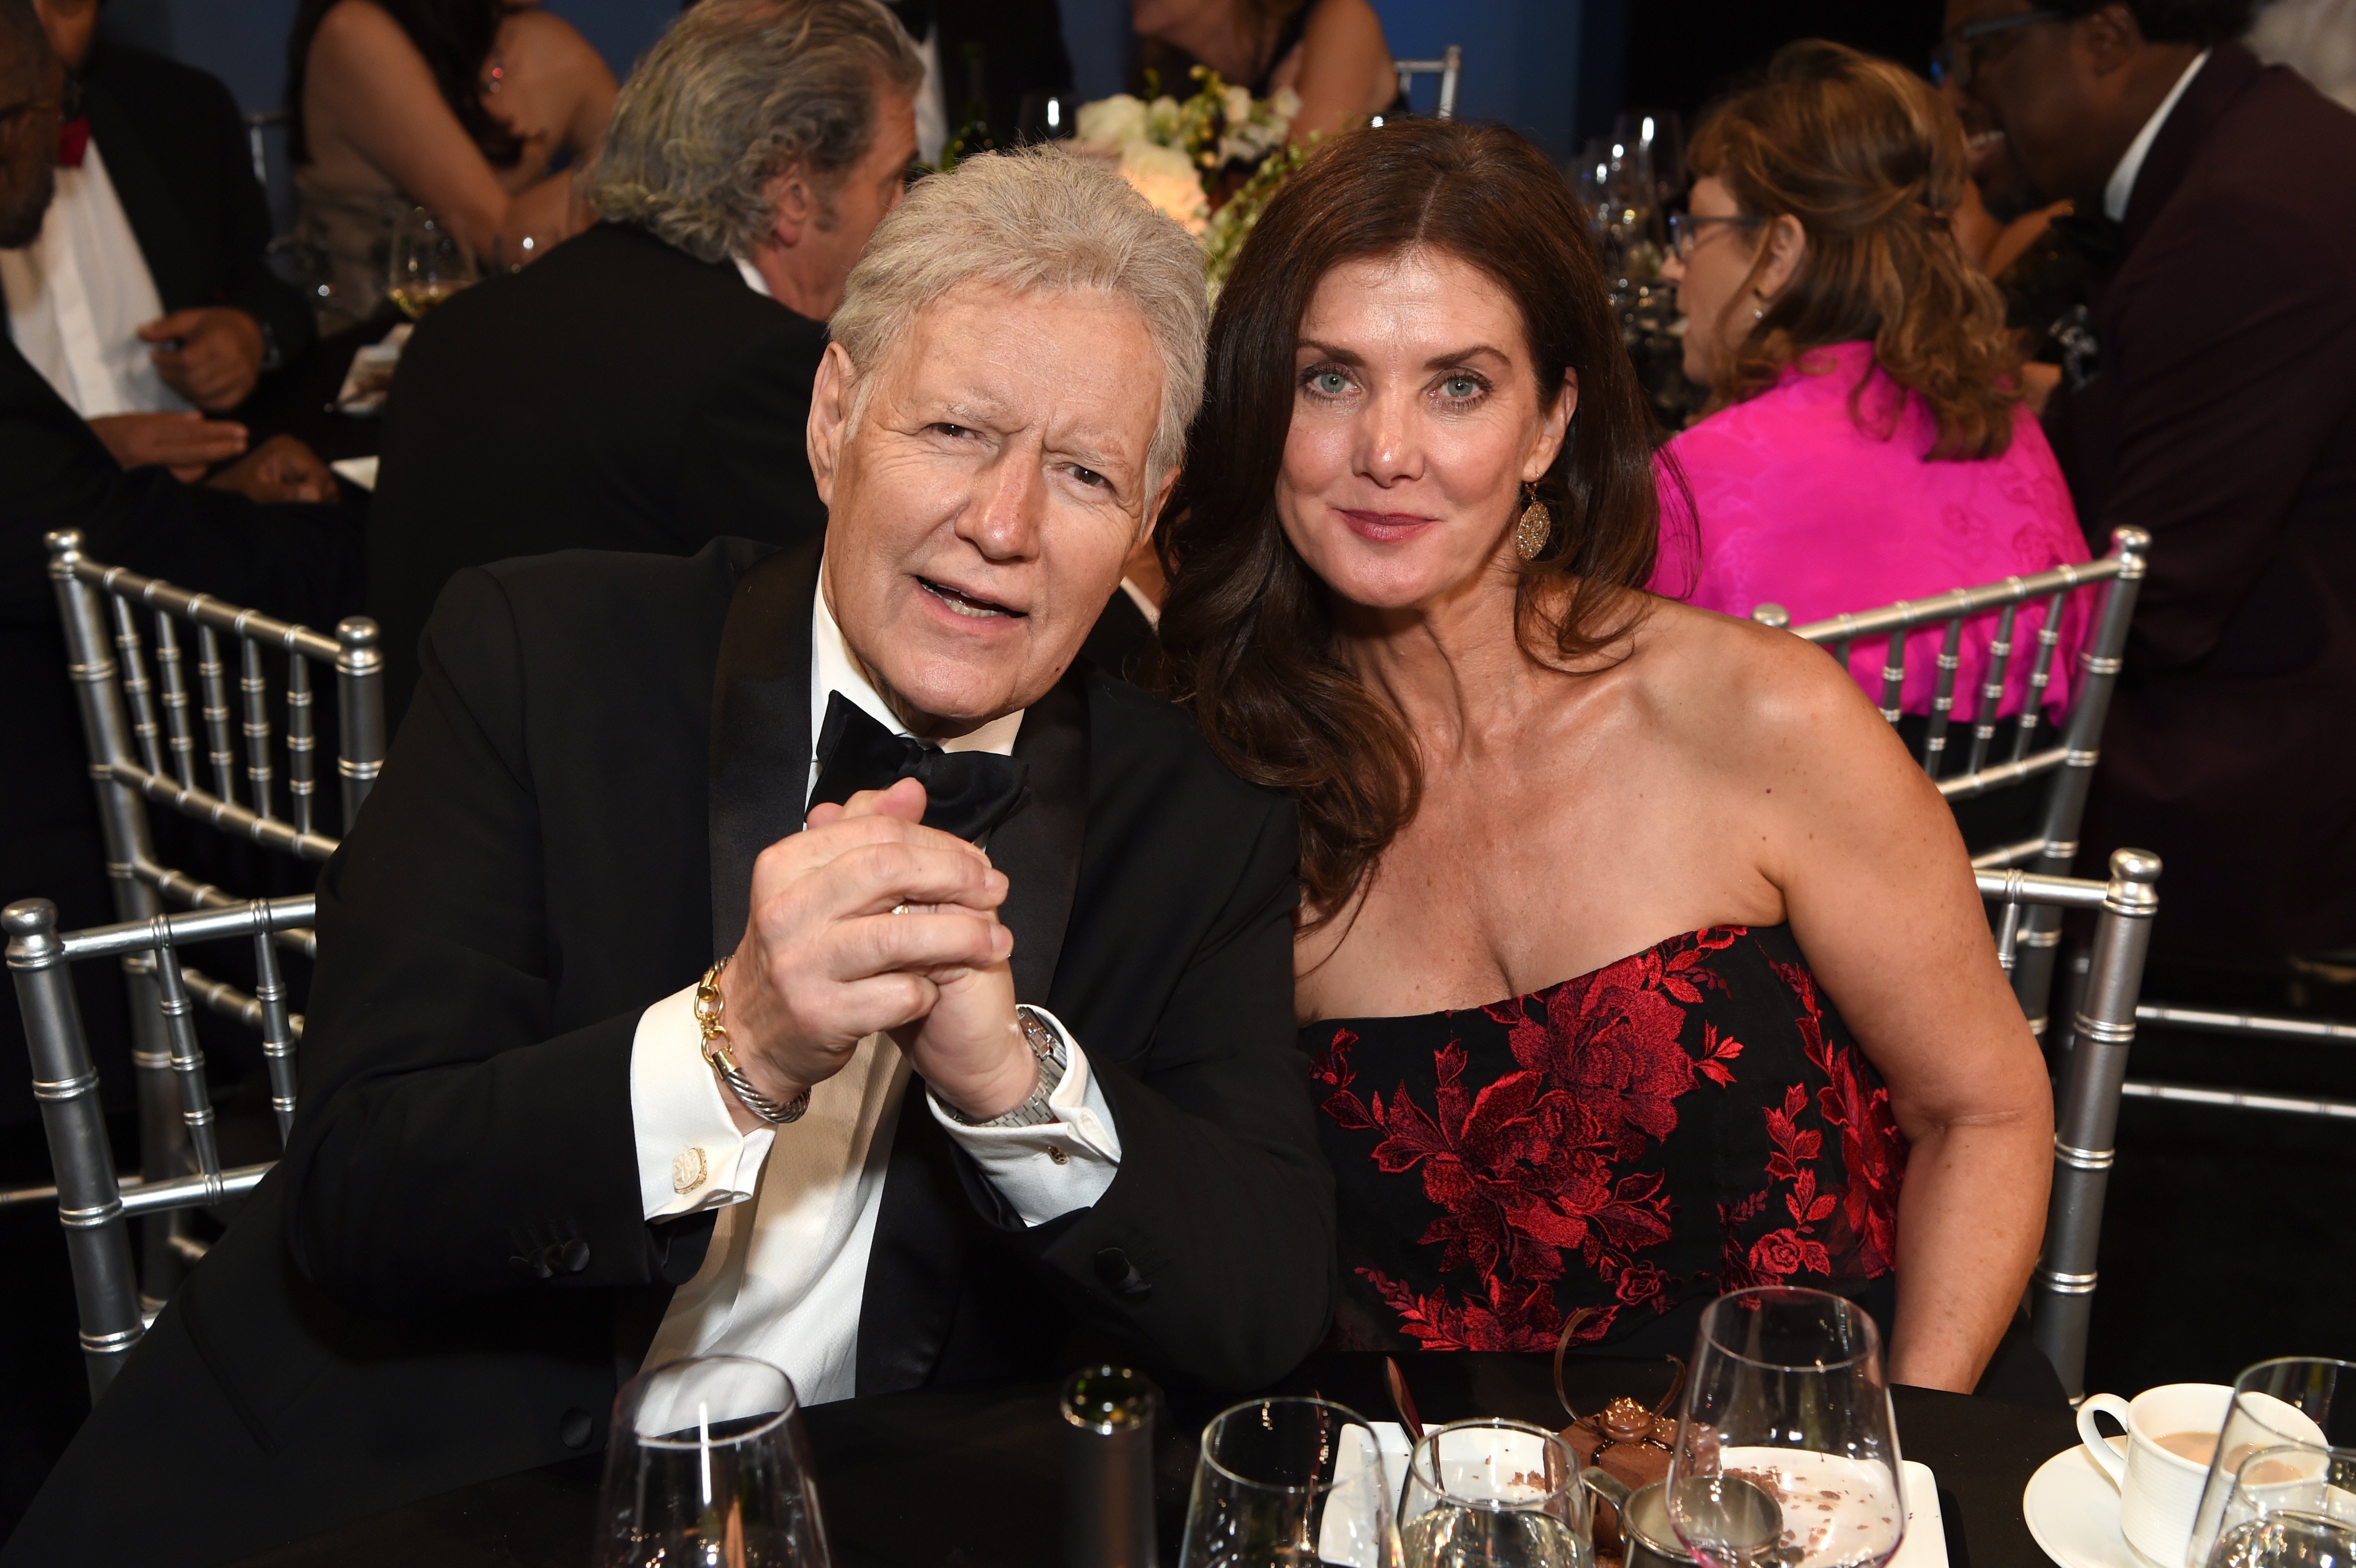 eopardy! host Alex Trebek and wife Jean Trebek attend the 47th AFI Life Achievement Award 